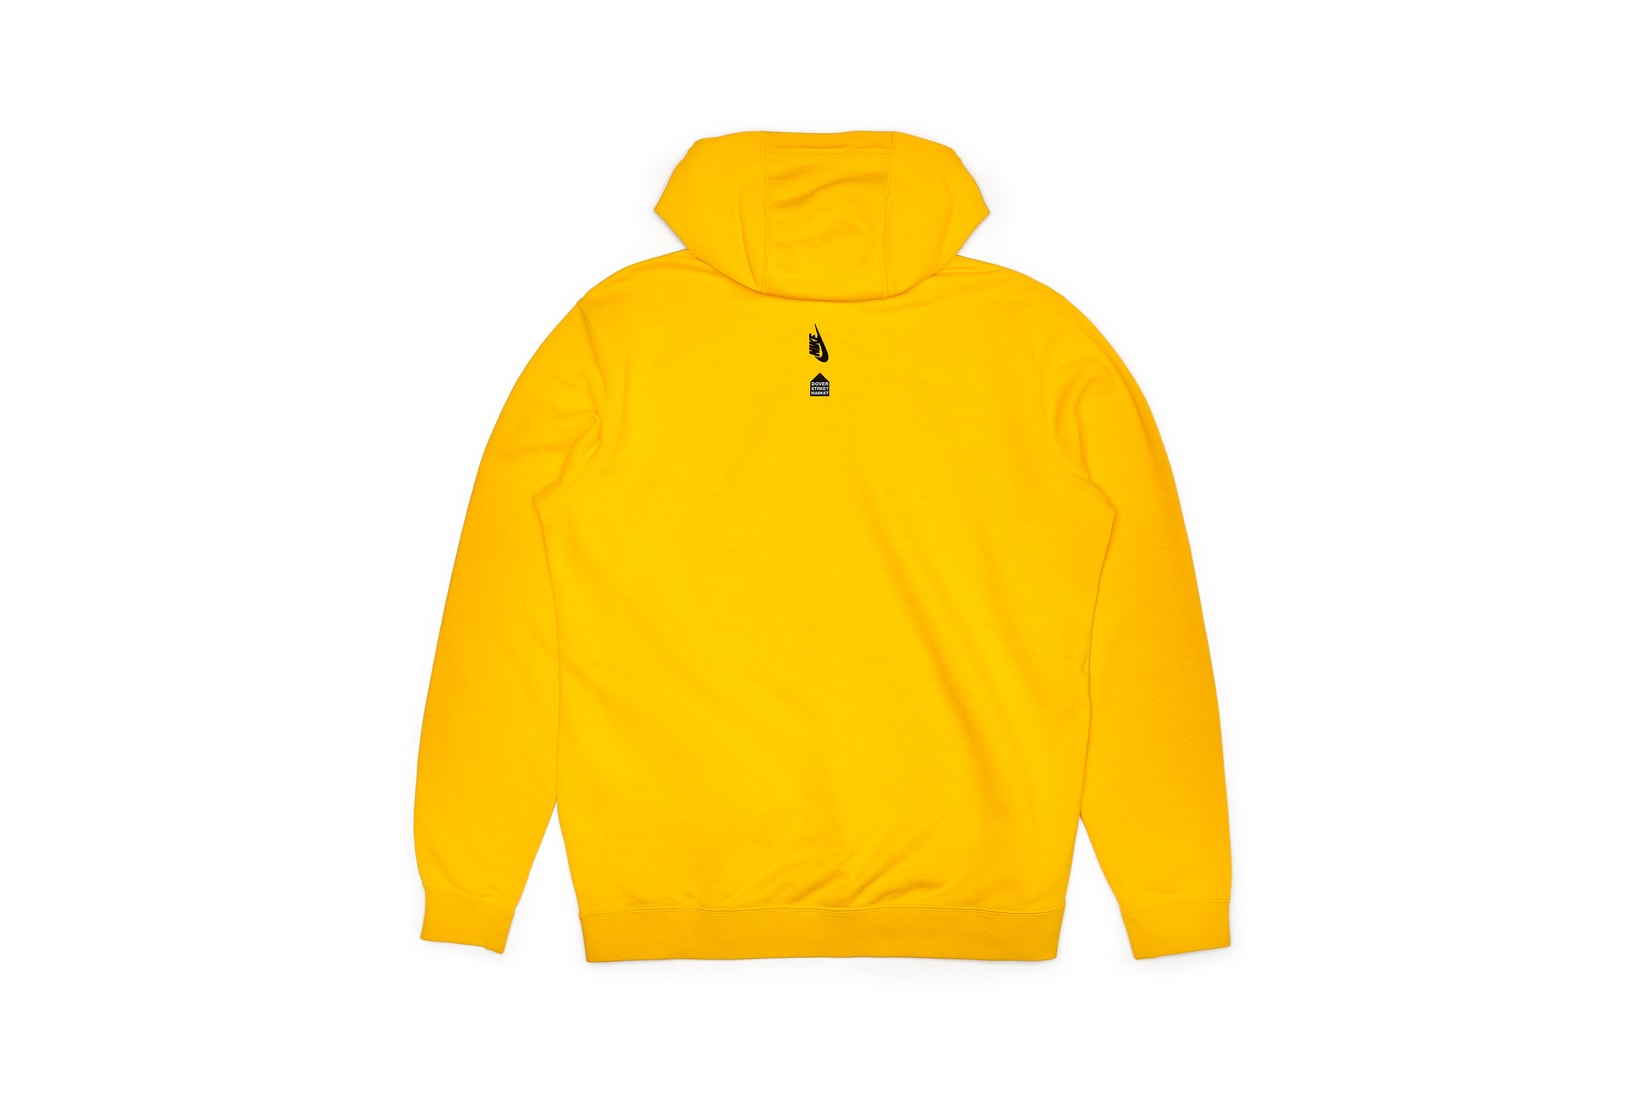 Nike x Dover Street Market Just Do It Hoodie Yellow